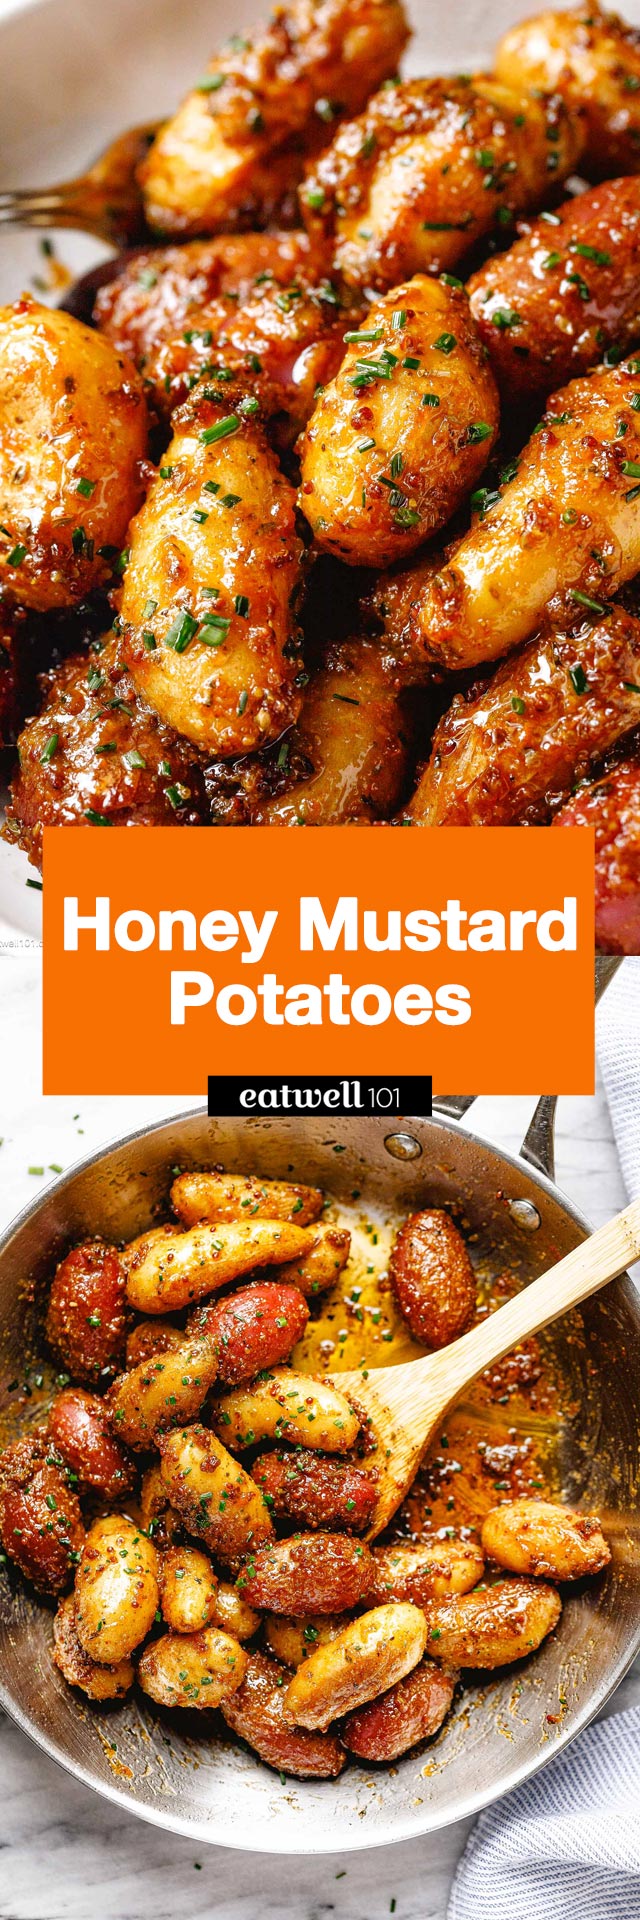 Honey Mustard Potatoes - #honey #mustard #potatoes #recipe #eatwell101 - The flavor combination makes these Honey Mustard Potatoes one of the best side dishes we have on here!